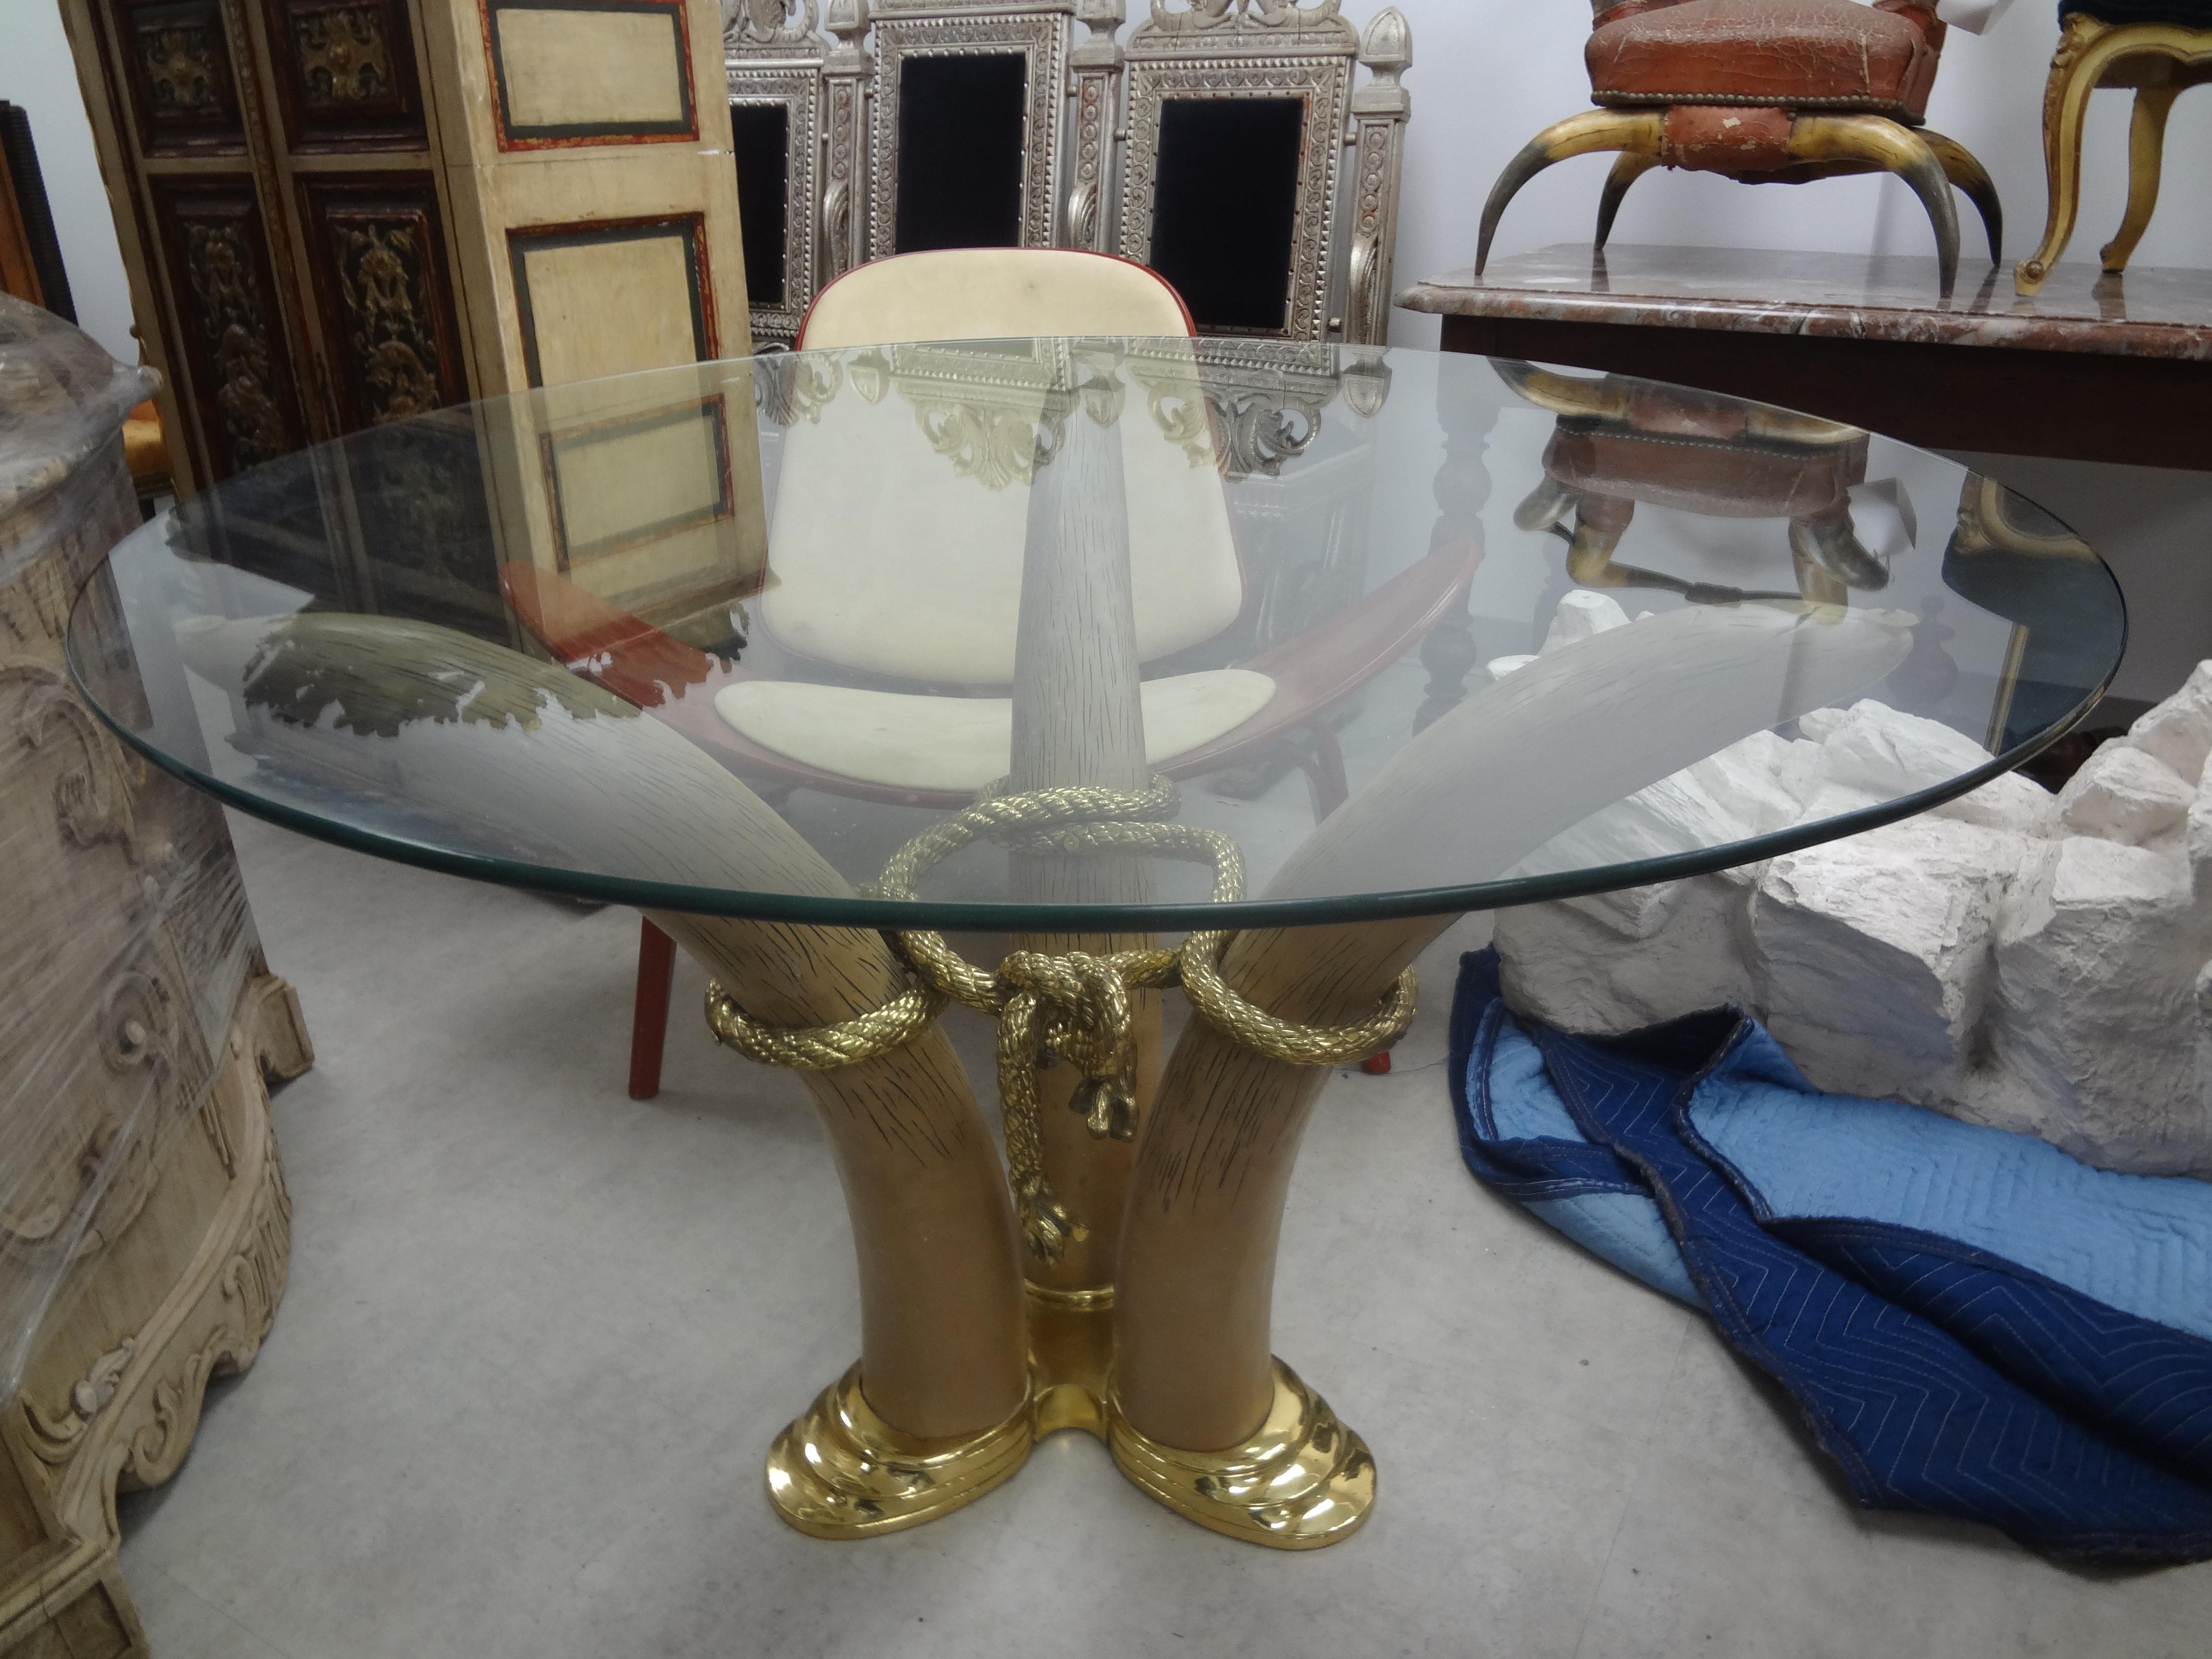 Vintage bronze faux elephant tusk center table by Italo Valenti.
Vintage bronze and resin faux elephant tusk center table by Italo Valenti of Barcelona, Spain. This gorgeous heavy weight postmodern center table currently has a 42 inch glass top but